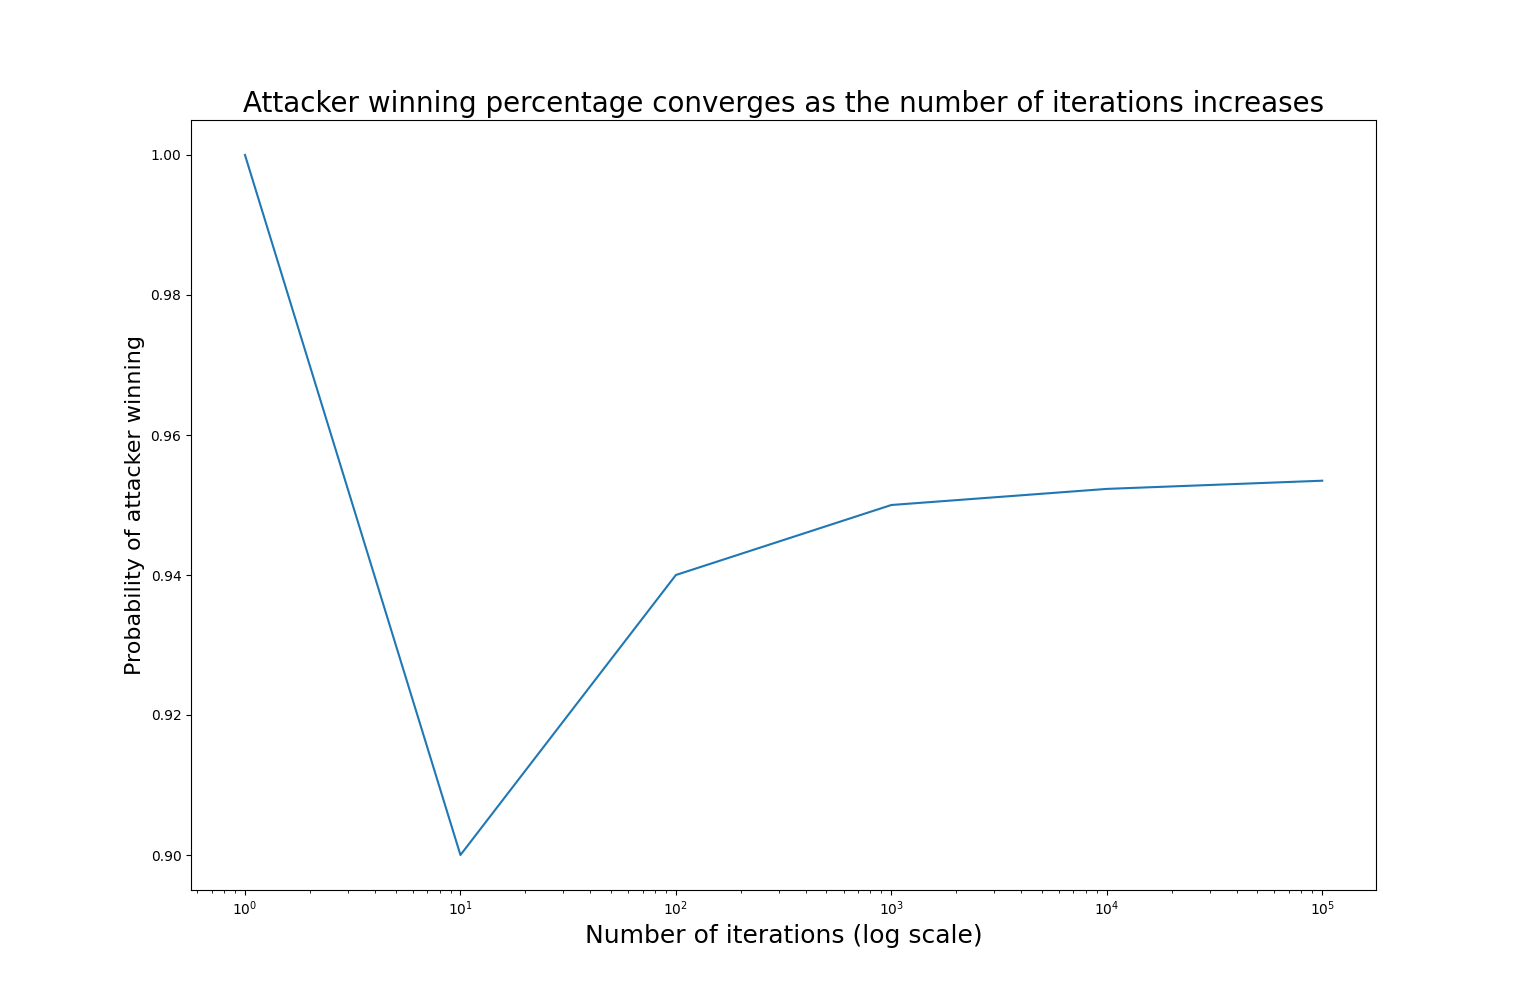 Attacker win probability as number of iterations increases